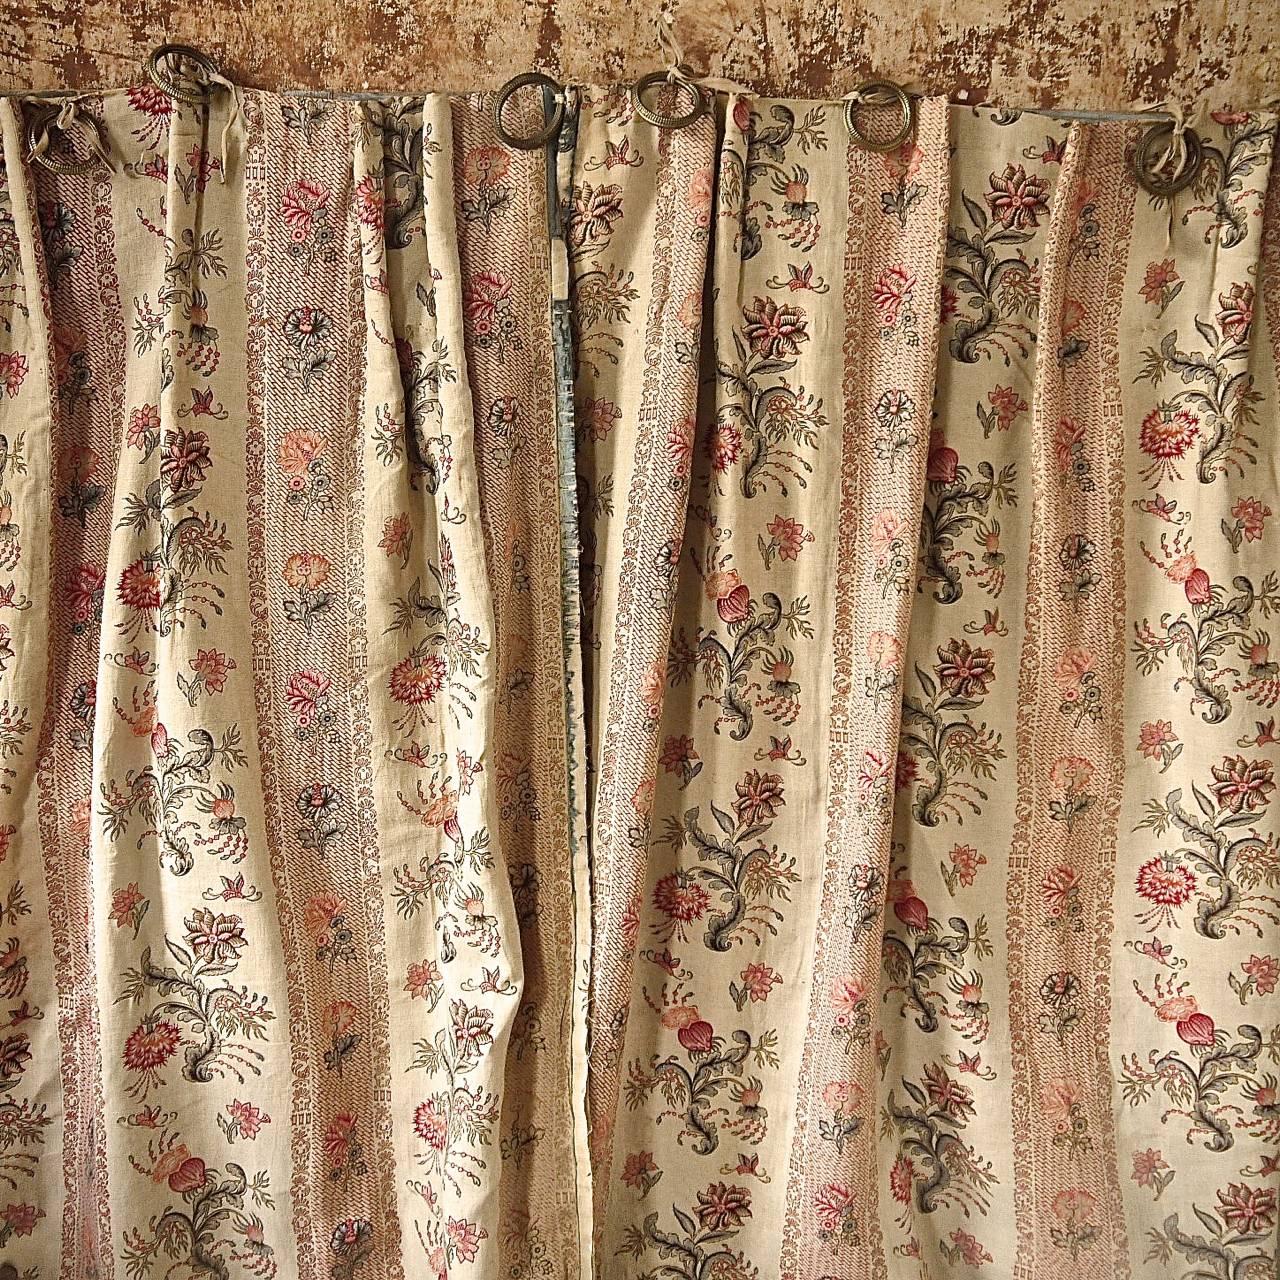 Pair of French late 19th century linen curtains printed with a stylised Indienne type design of flowers and patterned columns in soft rasberry and a greyish blue. Finished with a blue moire silk trim that is missing in many places and with its